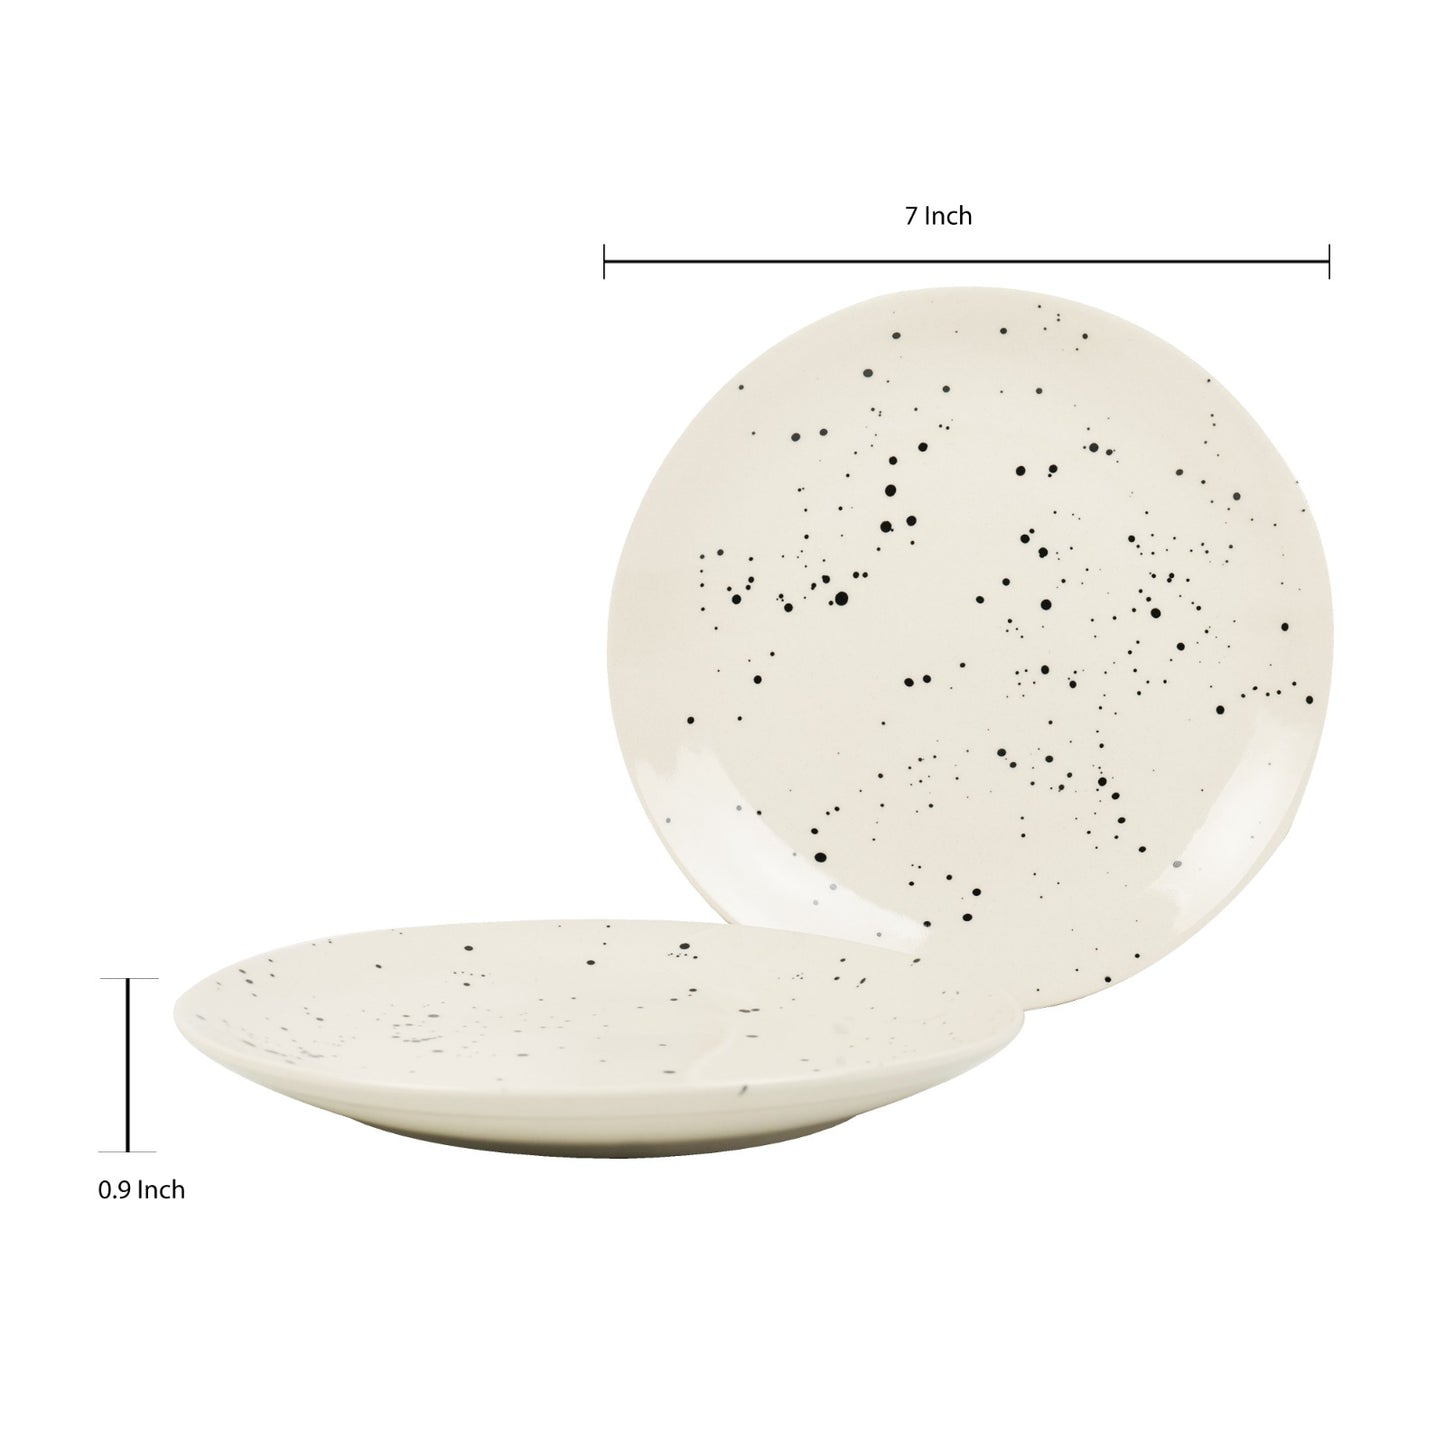 'Smokey Marble' Ceramic Side and Quarter Plates, Set of 6 (7 Inch)